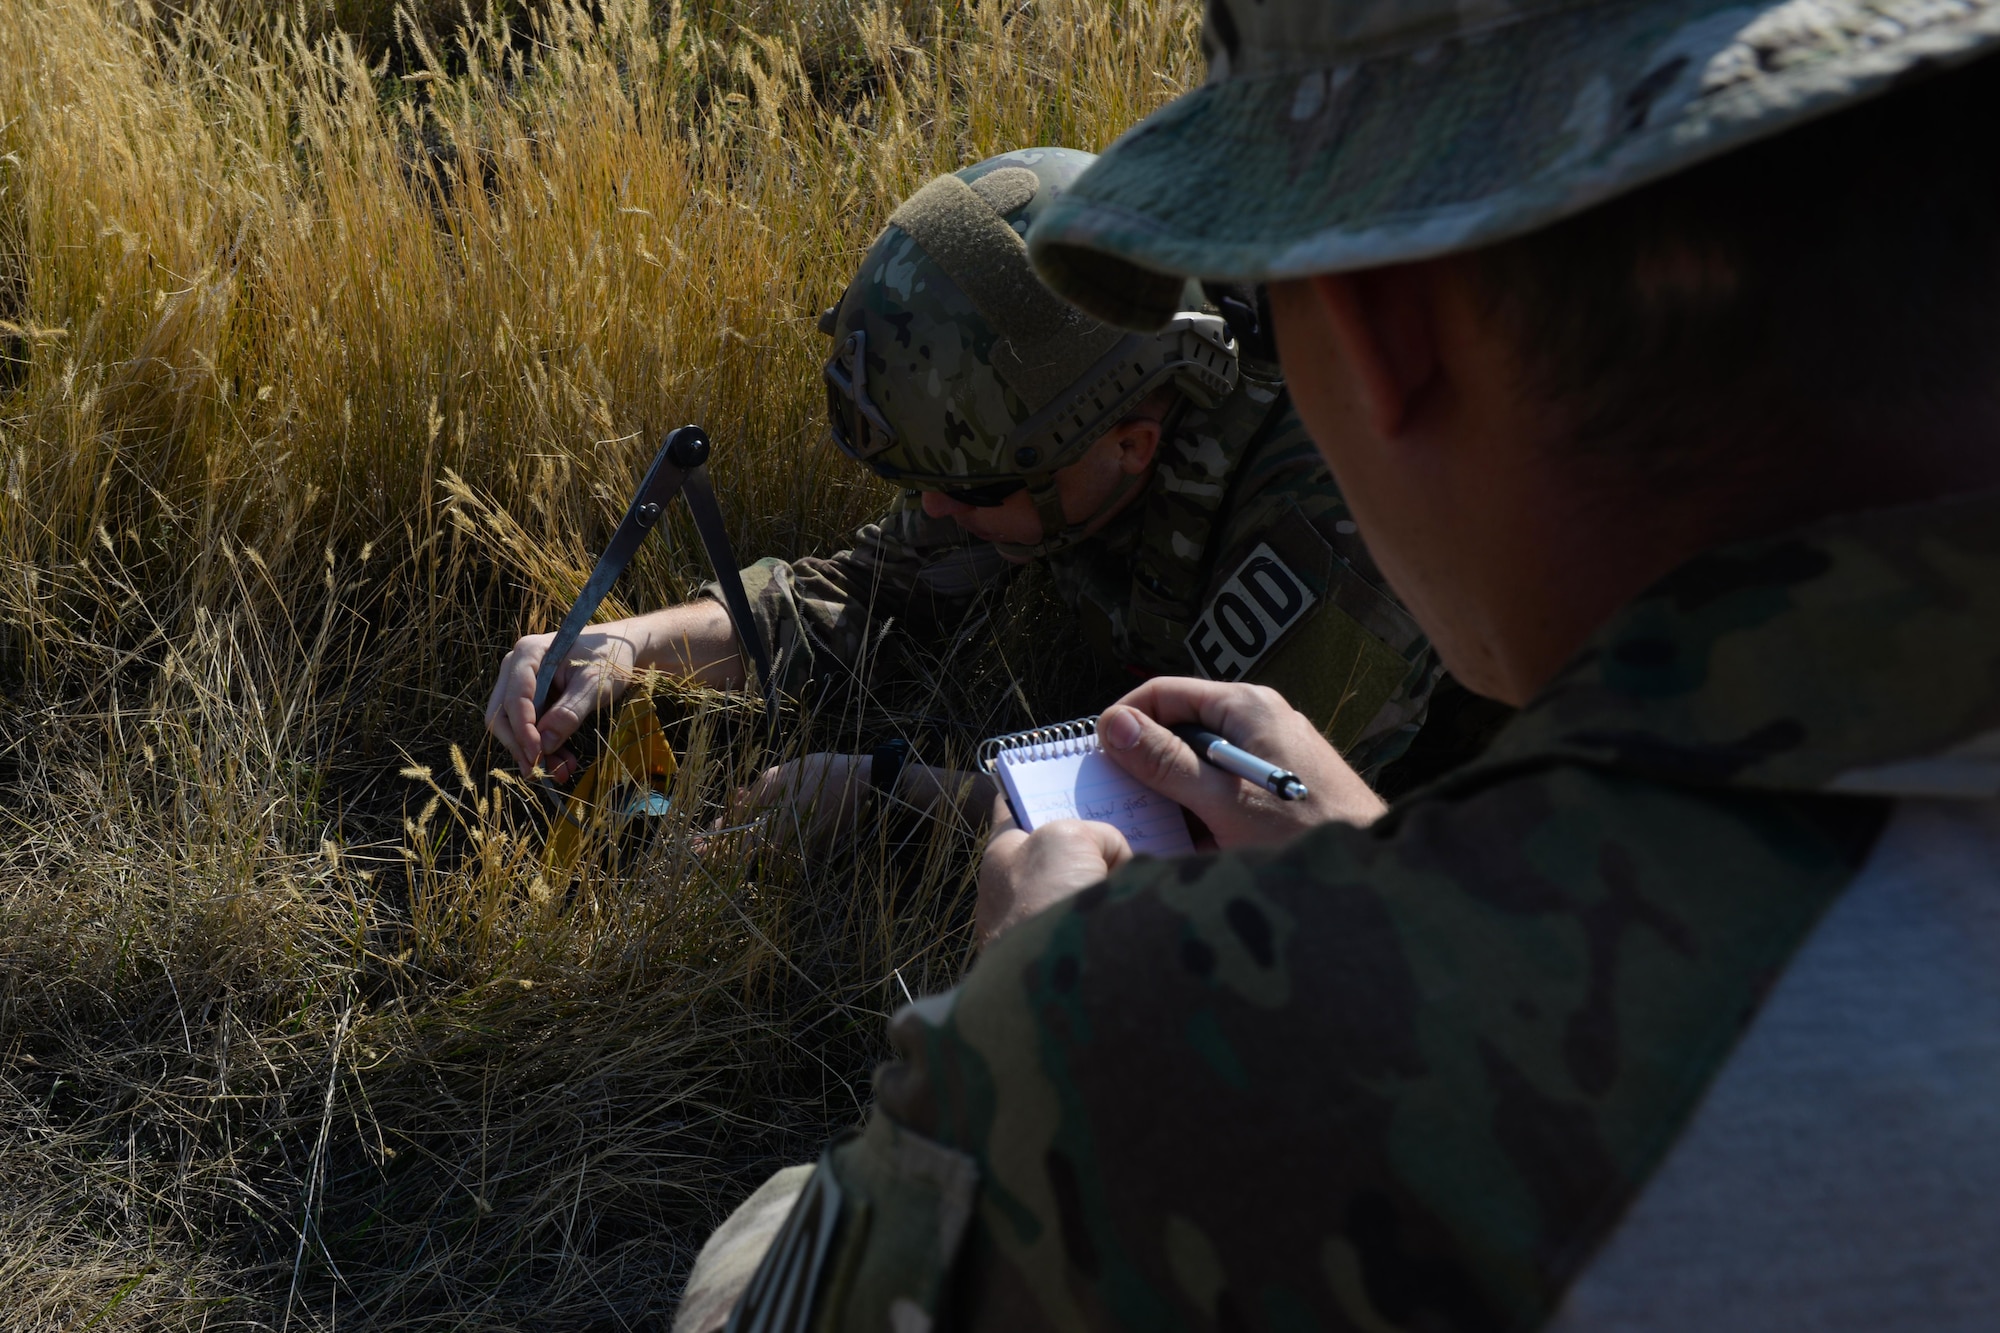 Senior Airman Zachary McCarthy, an explosive ordnance disposal technician assigned to the 28th Civil Engineer Squadron, takes notes on Staff Sgt. Robert Schmid, an EOD technician assigned to the 28th CES, while Schmid measures the dimensions of an unexploded ordnance during an EOD Team of the Year competition at Ellsworth Air Force Base, S.D., Sept. 12, 2017.  This scenario during the event had teams inspect different ordnances to determine the make and model of the explosives. (U.S. Air Force photo by Airman Nicolas Z. Erwin)